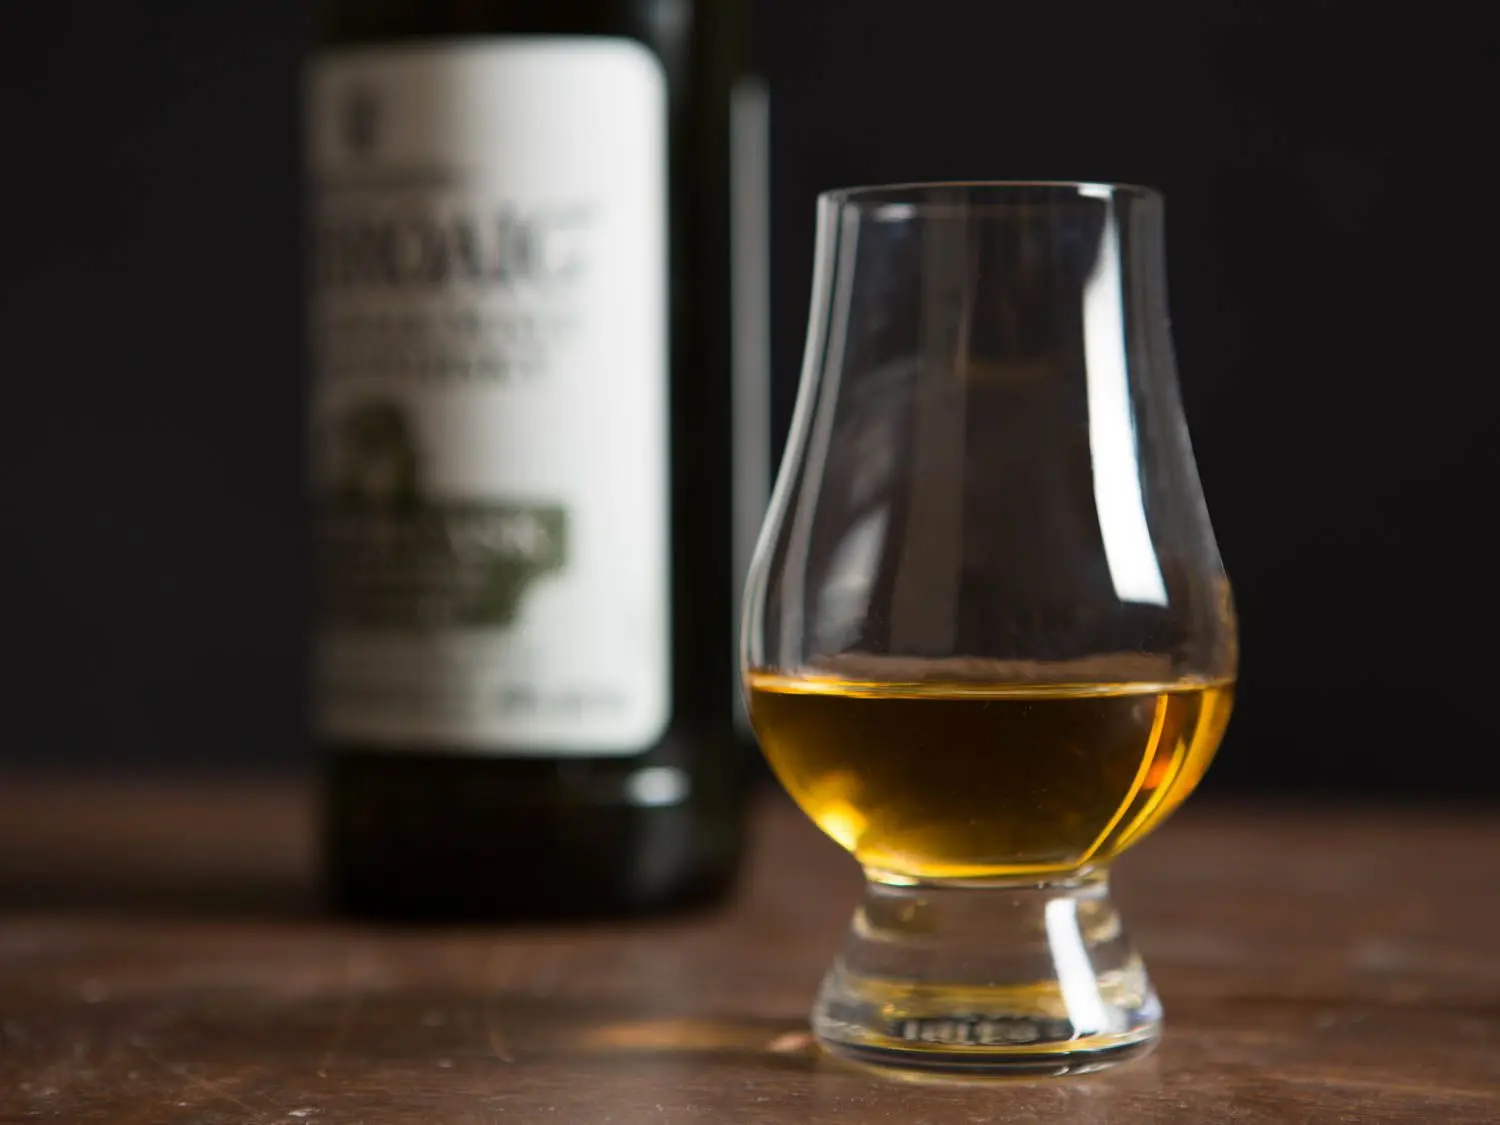 islay smoked whiskey - What is a good smoked whiskey